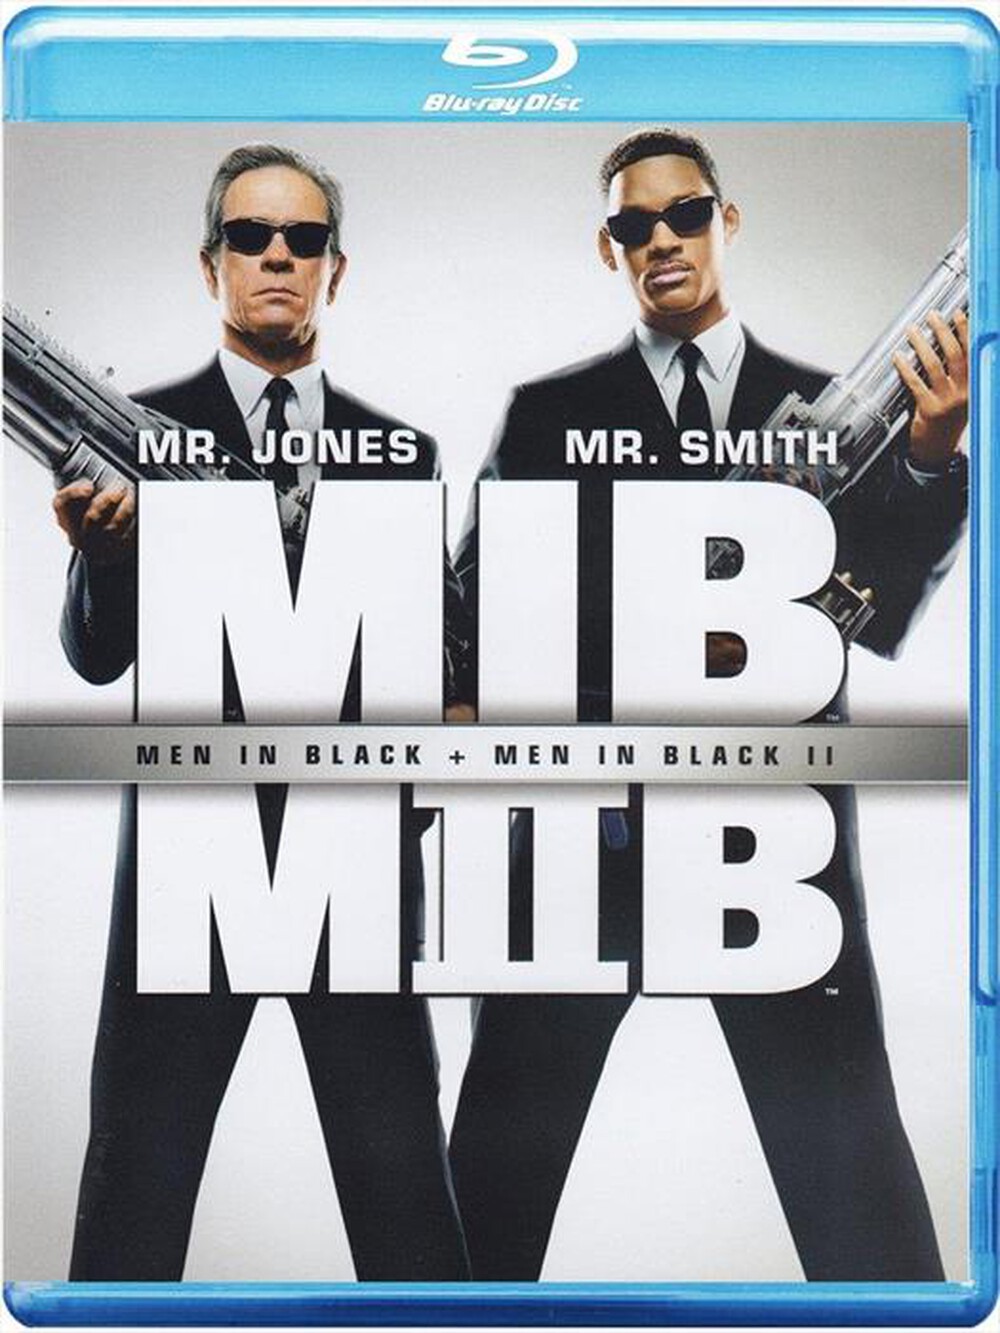 "UNIVERSAL PICTURES - Men In Black Collection (2 Blu-Ray)"